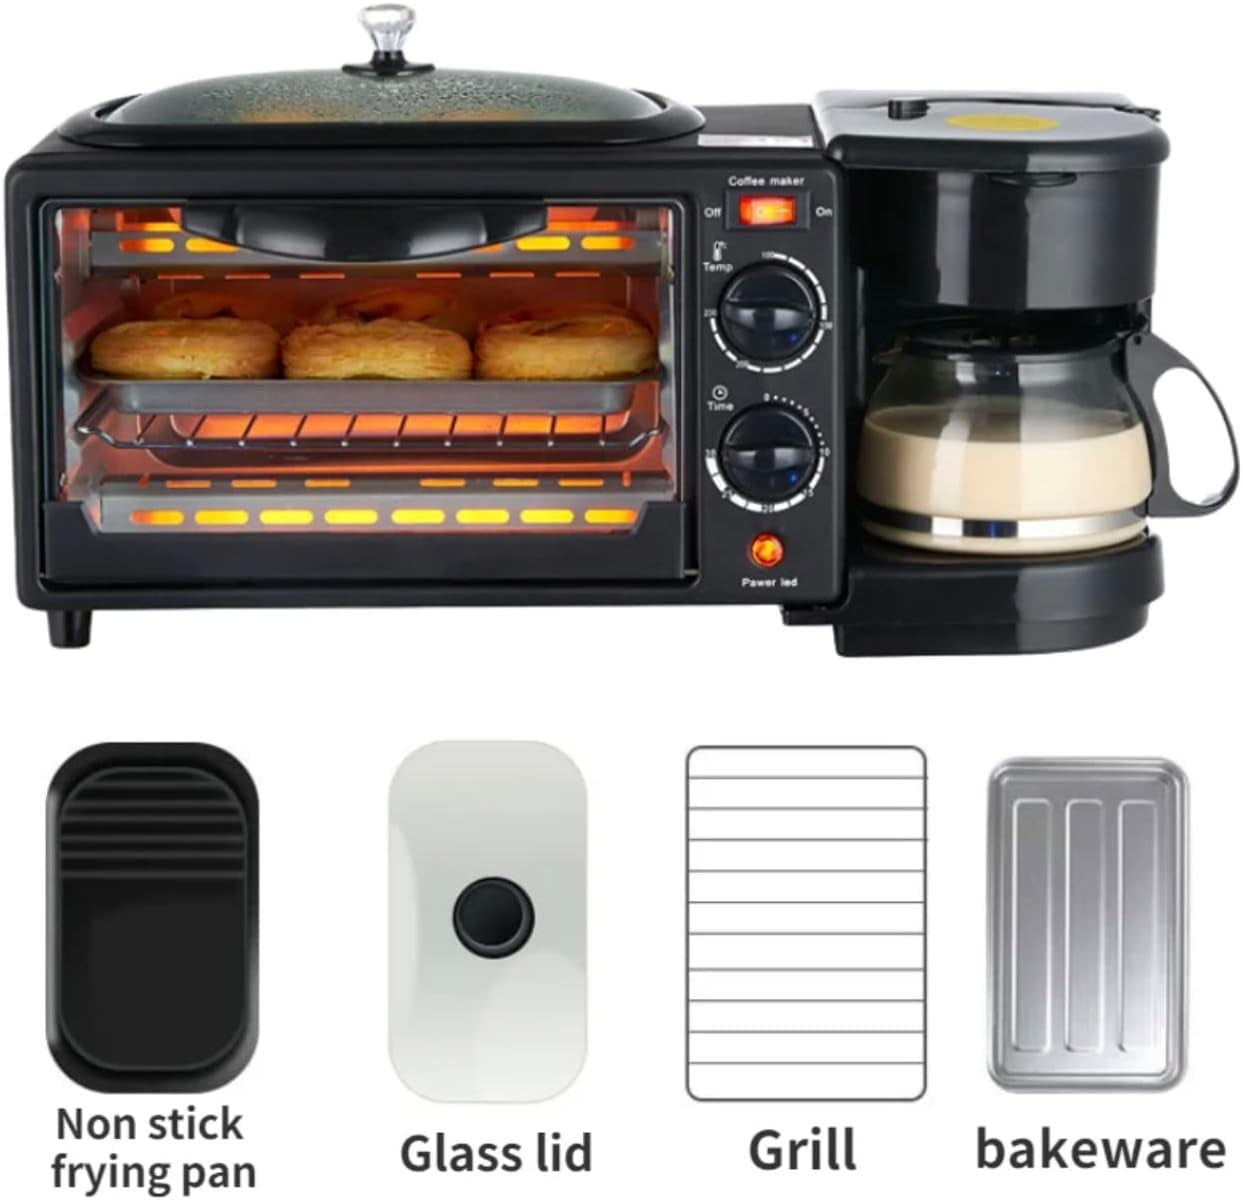 Home Multi-Function Toaster Machine Breakfast Black Three in One Microwave  and Coffee Maker 3 in 1 Toaster Coffee Maker 3 in 1 Coffee Maker Toaster  Maker - China Toaster Coffee Maker and